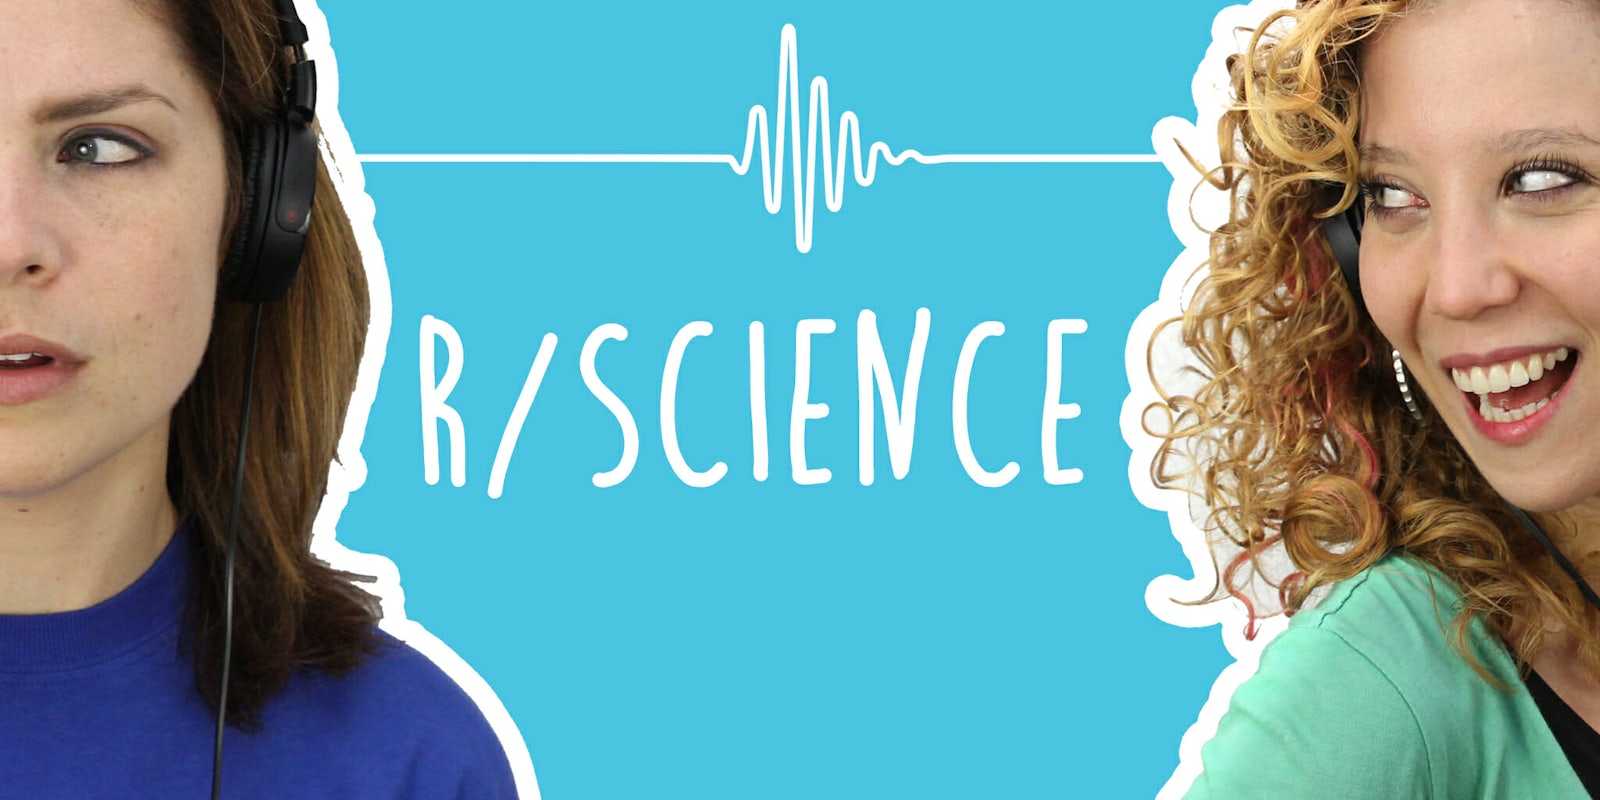 2 Girls 1 Podcast r/science